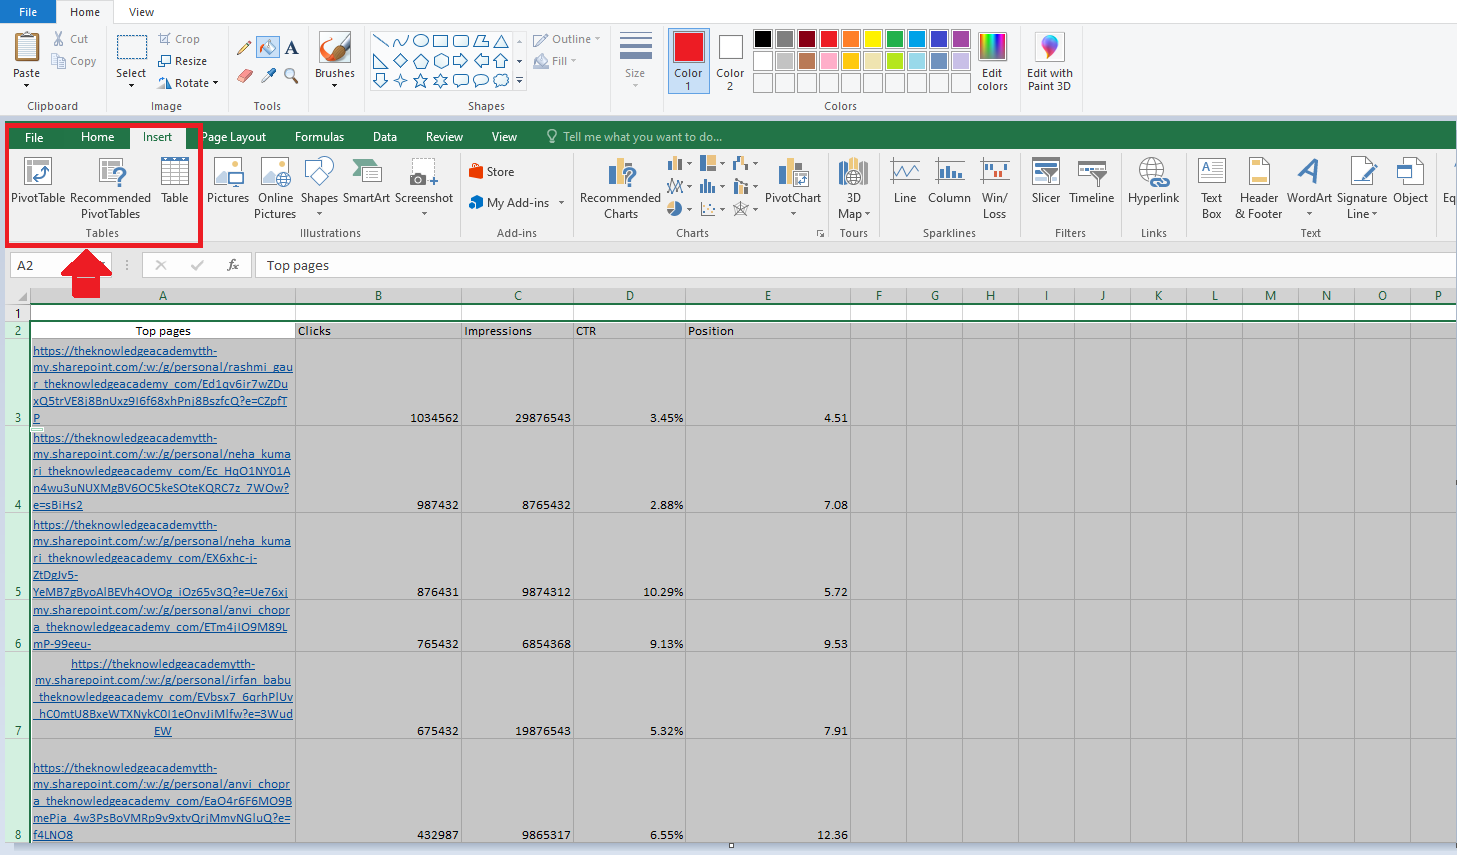 To make your Pivot Table, mark the cells 